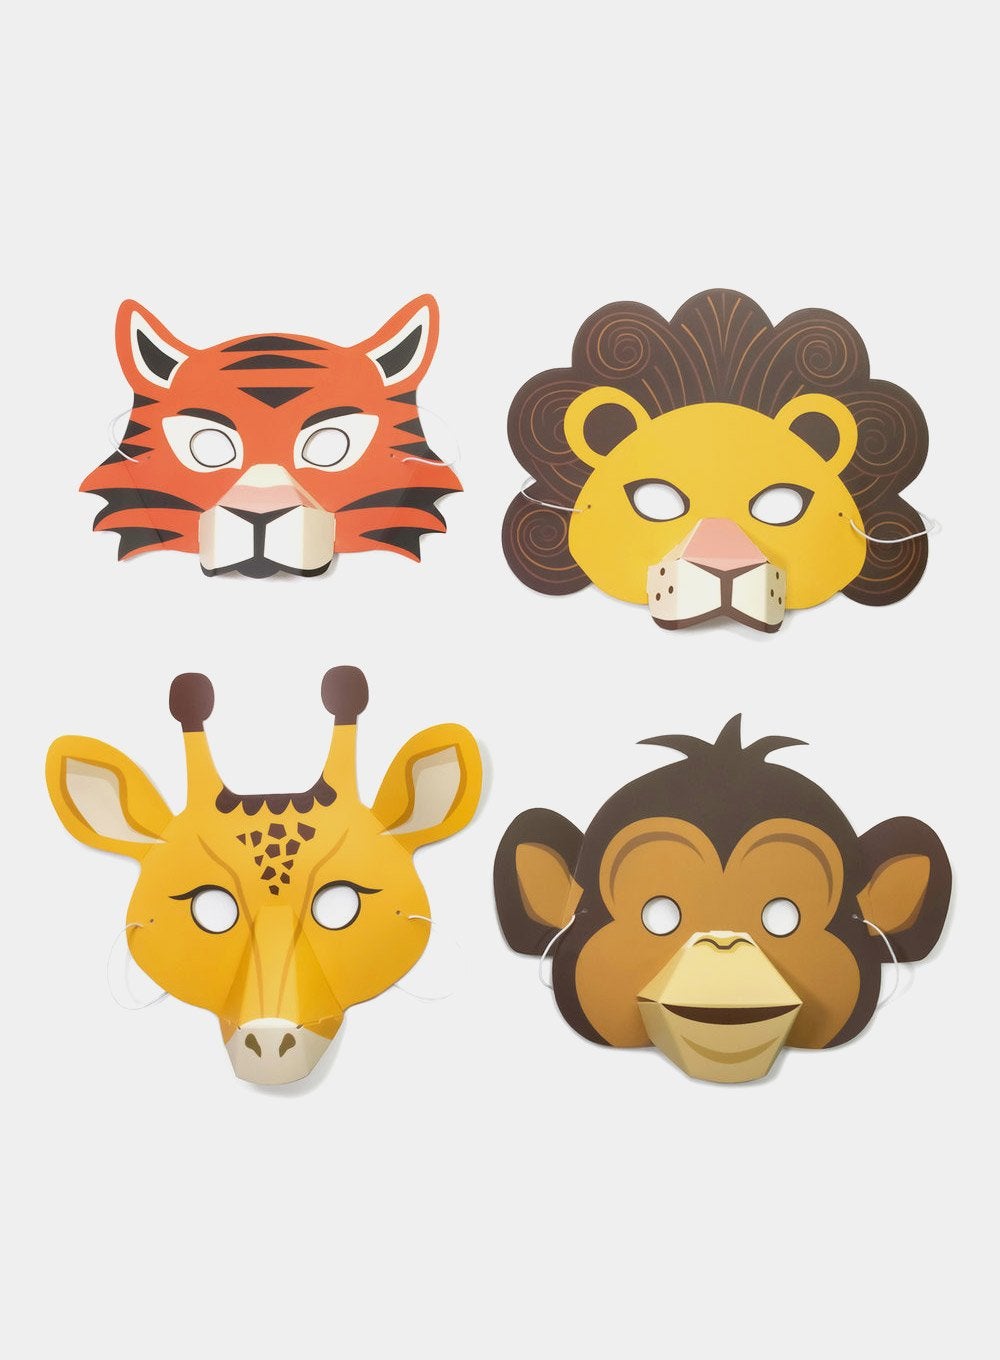 Children Create Your Own Jungle Animal Masks Toy